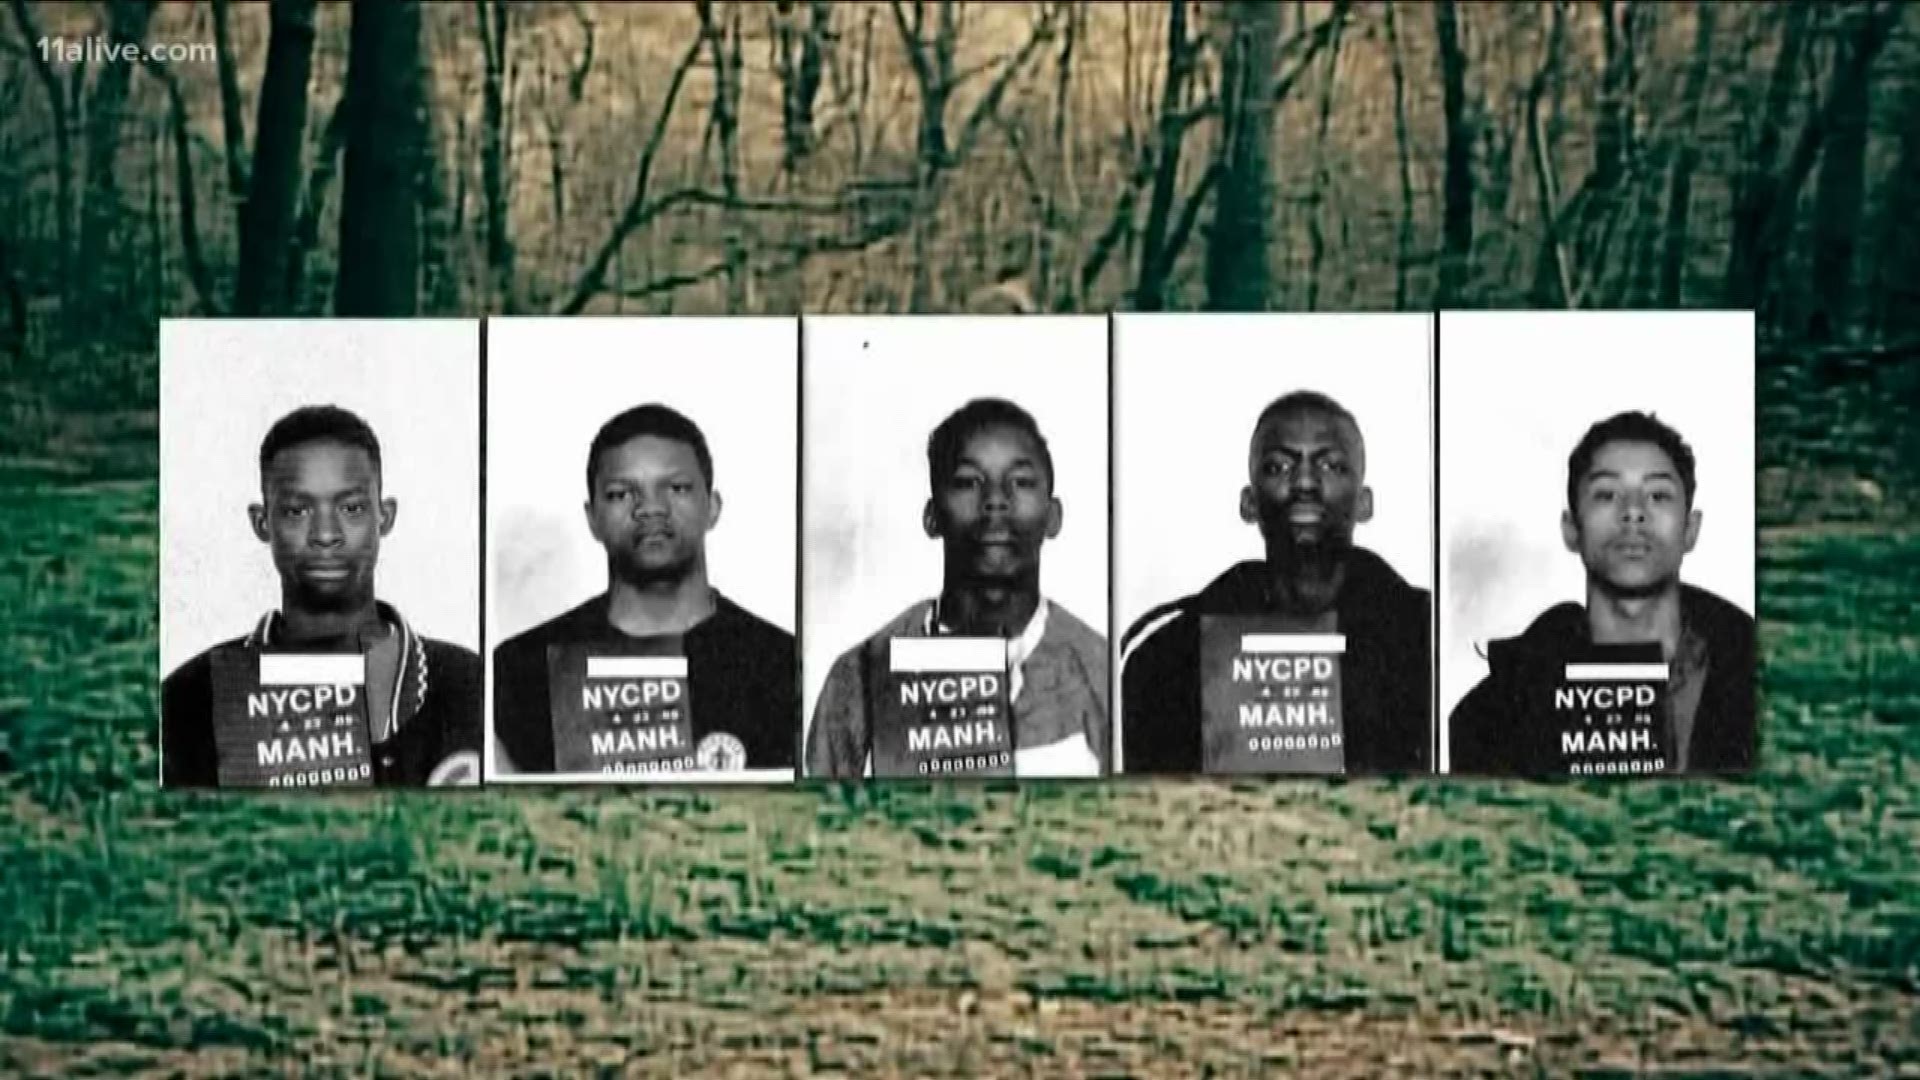 Two of the exonerated five from the notorious "Central Park Five" case spoke to 11Alive, after the Netflix series portrayed their case. Now, the prosecutor responsible for their convictions says the series is full of distortions and falsehoods.